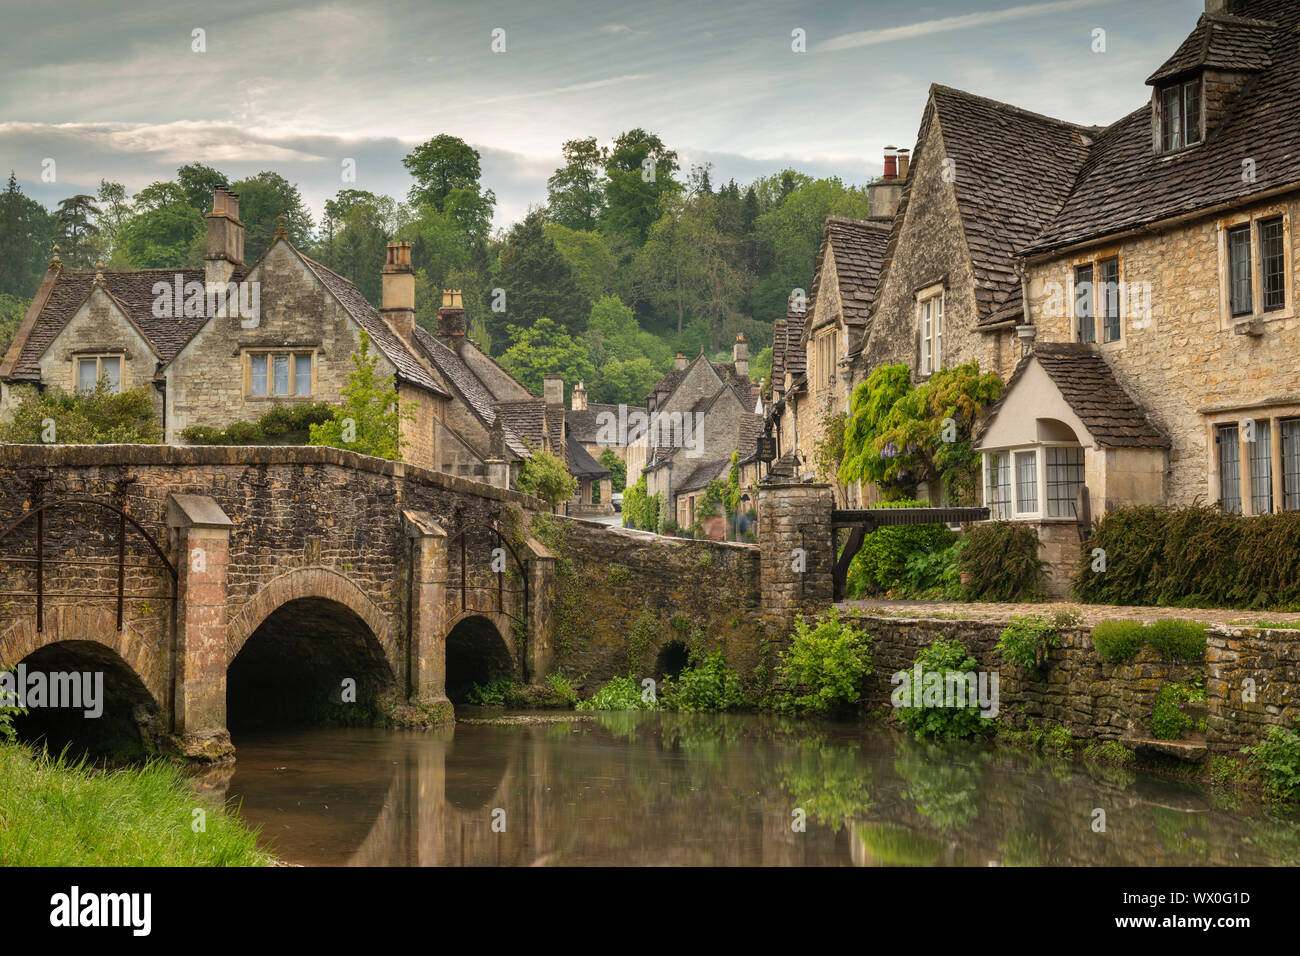 The picturesque Cotswolds village of Castle Combe, Wiltshire, England, United Kingdom, Europe Stock Photo